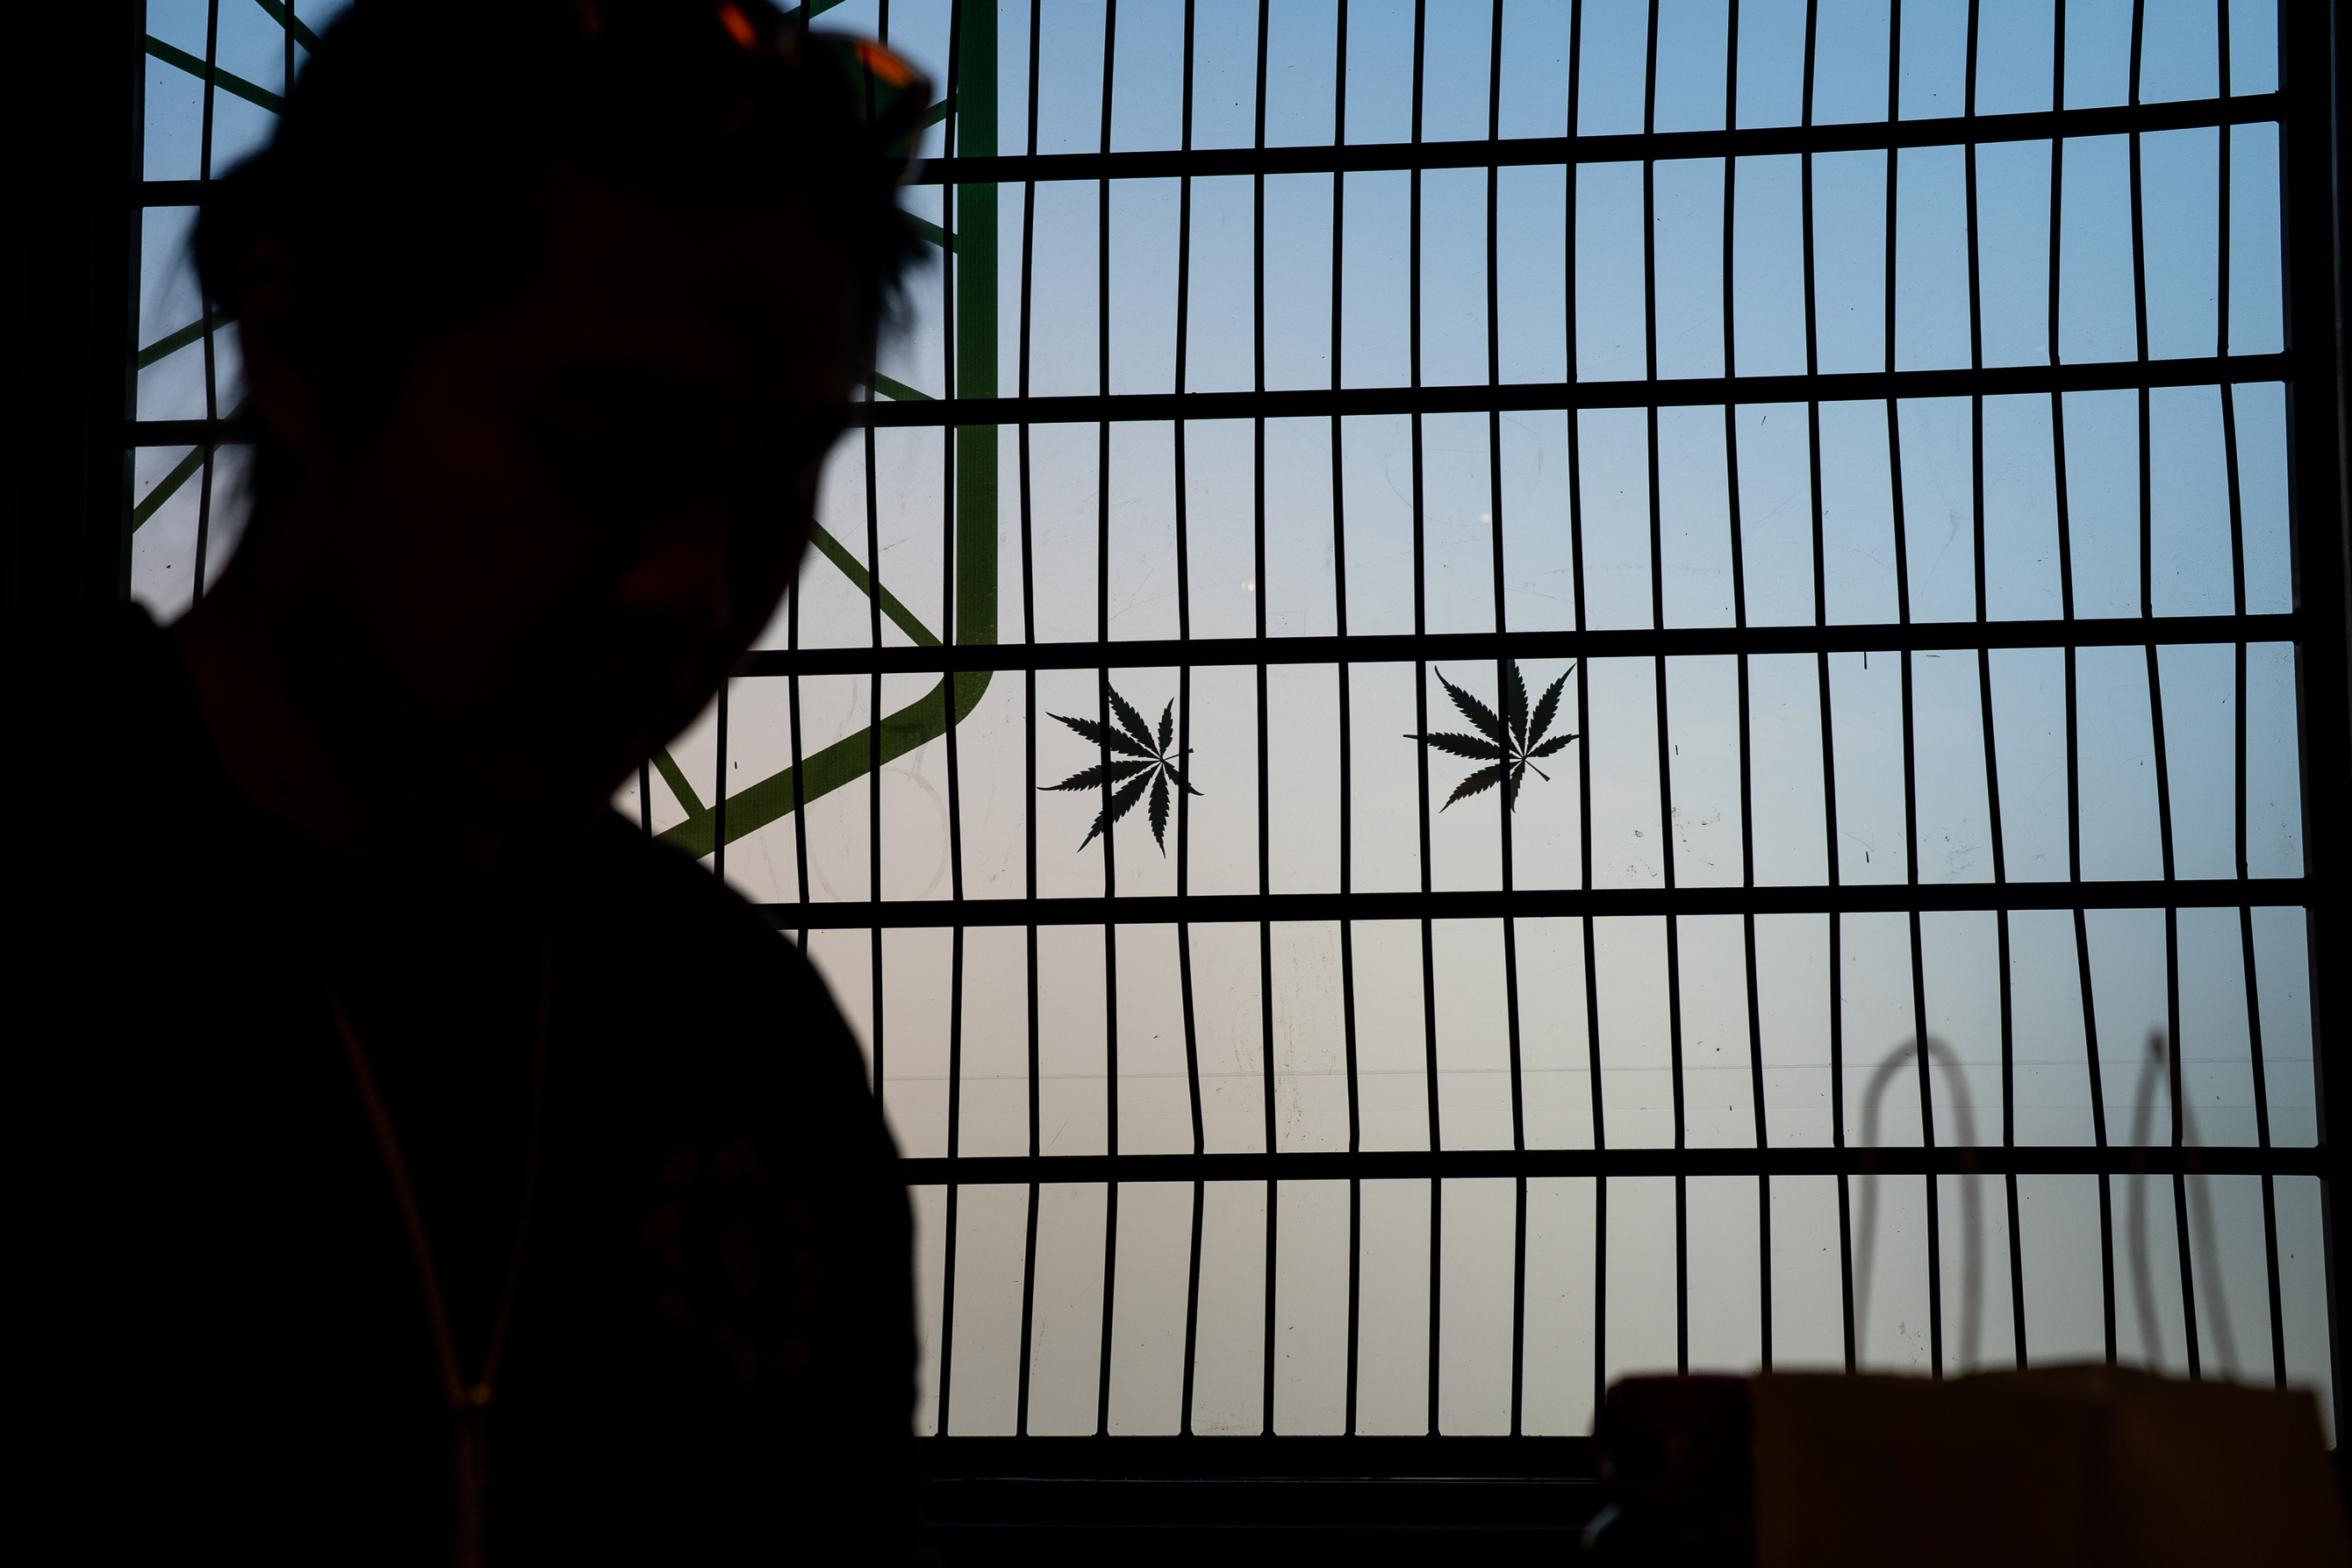 Cannabis leaves hang silhouetted on a window